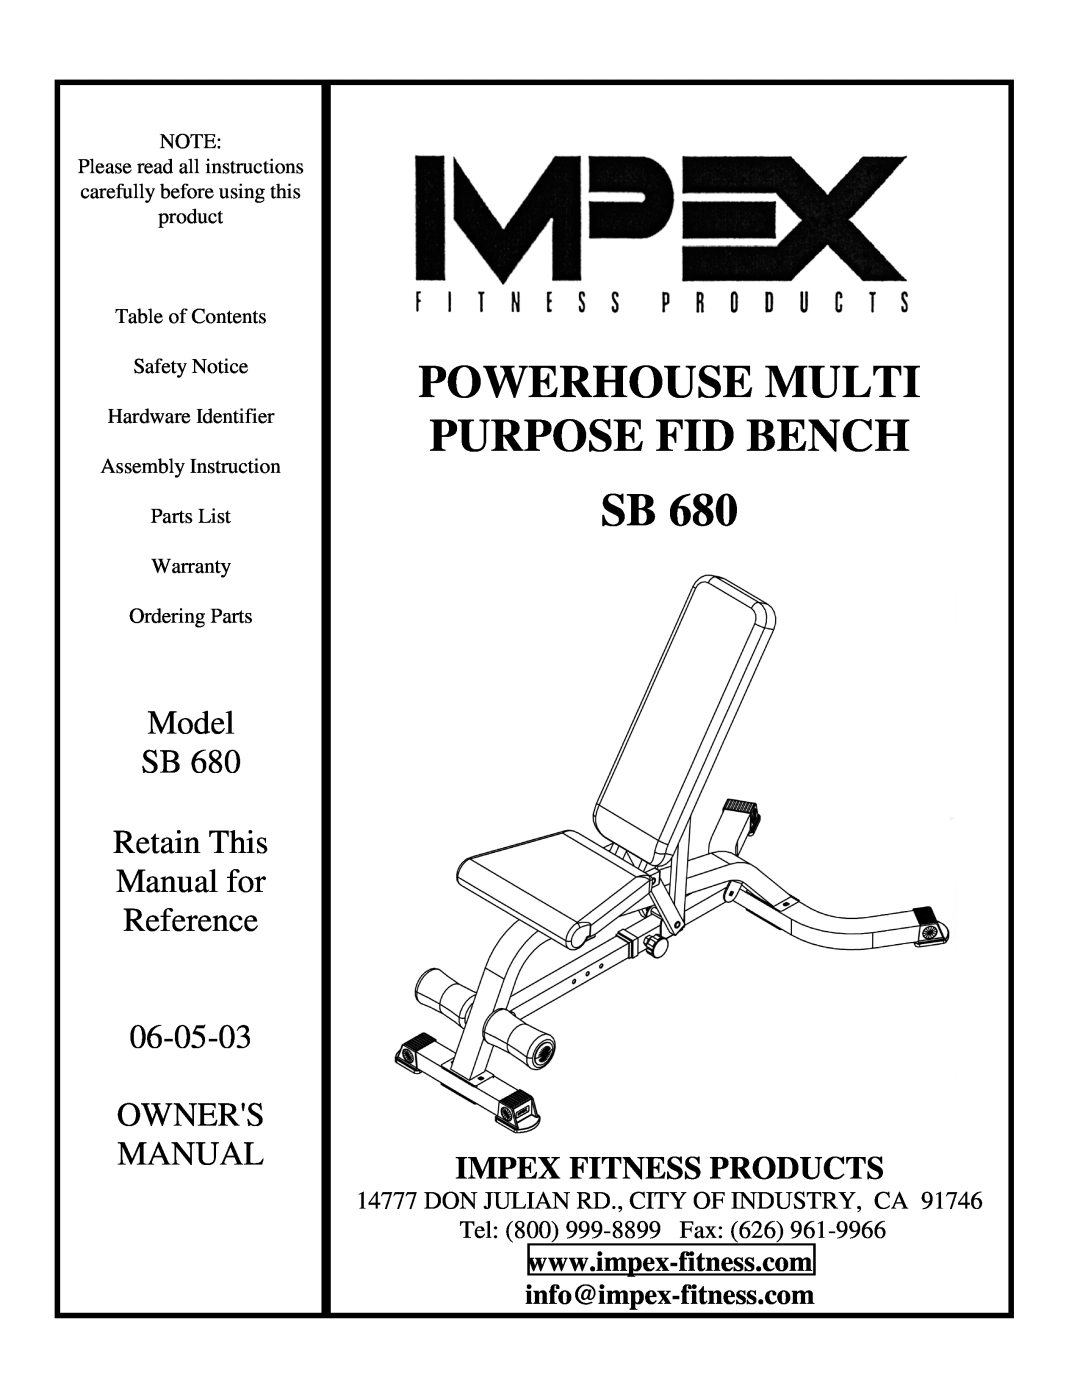 Impex SB 680 manual info@impex-fitness.com, Powerhouse Multi, Purpose Fid Bench, Model, Retain This, Manual for, Reference 